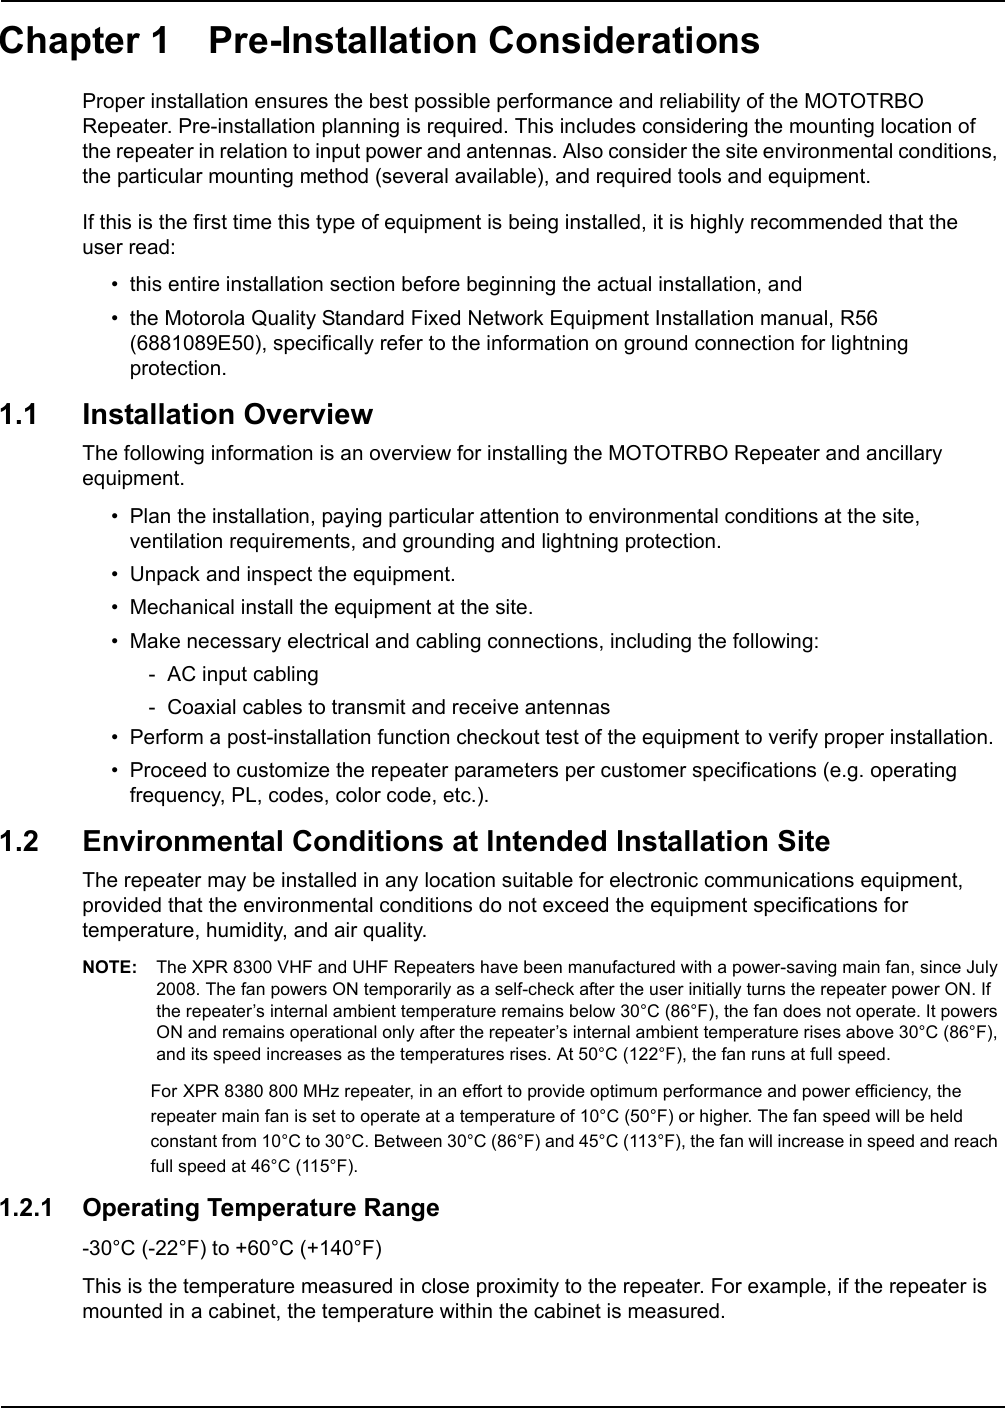 Chapter 1 Pre-Installation Considerations Proper installation ensures the best possible performance and reliability of the MOTOTRBO Repeater. Pre-installation planning is required. This includes considering the mounting location of the repeater in relation to input power and antennas. Also consider the site environmental conditions, the particular mounting method (several available), and required tools and equipment.If this is the first time this type of equipment is being installed, it is highly recommended that the  user read:• this entire installation section before beginning the actual installation, and• the Motorola Quality Standard Fixed Network Equipment Installation manual, R56 (6881089E50), specifically refer to the information on ground connection for lightning protection.1.1 Installation OverviewThe following information is an overview for installing the MOTOTRBO Repeater and ancillary equipment. • Plan the installation, paying particular attention to environmental conditions at the site, ventilation requirements, and grounding and lightning protection.• Unpack and inspect the equipment.• Mechanical install the equipment at the site.• Make necessary electrical and cabling connections, including the following:- AC input cabling- Coaxial cables to transmit and receive antennas• Perform a post-installation function checkout test of the equipment to verify proper installation.• Proceed to customize the repeater parameters per customer specifications (e.g. operating frequency, PL, codes, color code, etc.).1.2 Environmental Conditions at Intended Installation SiteThe repeater may be installed in any location suitable for electronic communications equipment, provided that the environmental conditions do not exceed the equipment specifications for temperature, humidity, and air quality. NOTE: The XPR 8300 VHF and UHF Repeaters have been manufactured with a power-saving main fan, since July 2008. The fan powers ON temporarily as a self-check after the user initially turns the repeater power ON. If the repeater’s internal ambient temperature remains below 30°C (86°F), the fan does not operate. It powers ON and remains operational only after the repeater’s internal ambient temperature rises above 30°C (86°F), and its speed increases as the temperatures rises. At 50°C (122°F), the fan runs at full speed.For XPR 8380 800 MHz repeater, in an effort to provide optimum performance and power efficiency, the repeater main fan is set to operate at a temperature of 10°C (50°F) or higher. The fan speed will be held constant from 10°C to 30°C. Between 30°C (86°F) and 45°C (113°F), the fan will increase in speed and reach full speed at 46°C (115°F).1.2.1 Operating Temperature Range-30°C (-22°F) to +60°C (+140°F)This is the temperature measured in close proximity to the repeater. For example, if the repeater is mounted in a cabinet, the temperature within the cabinet is measured.